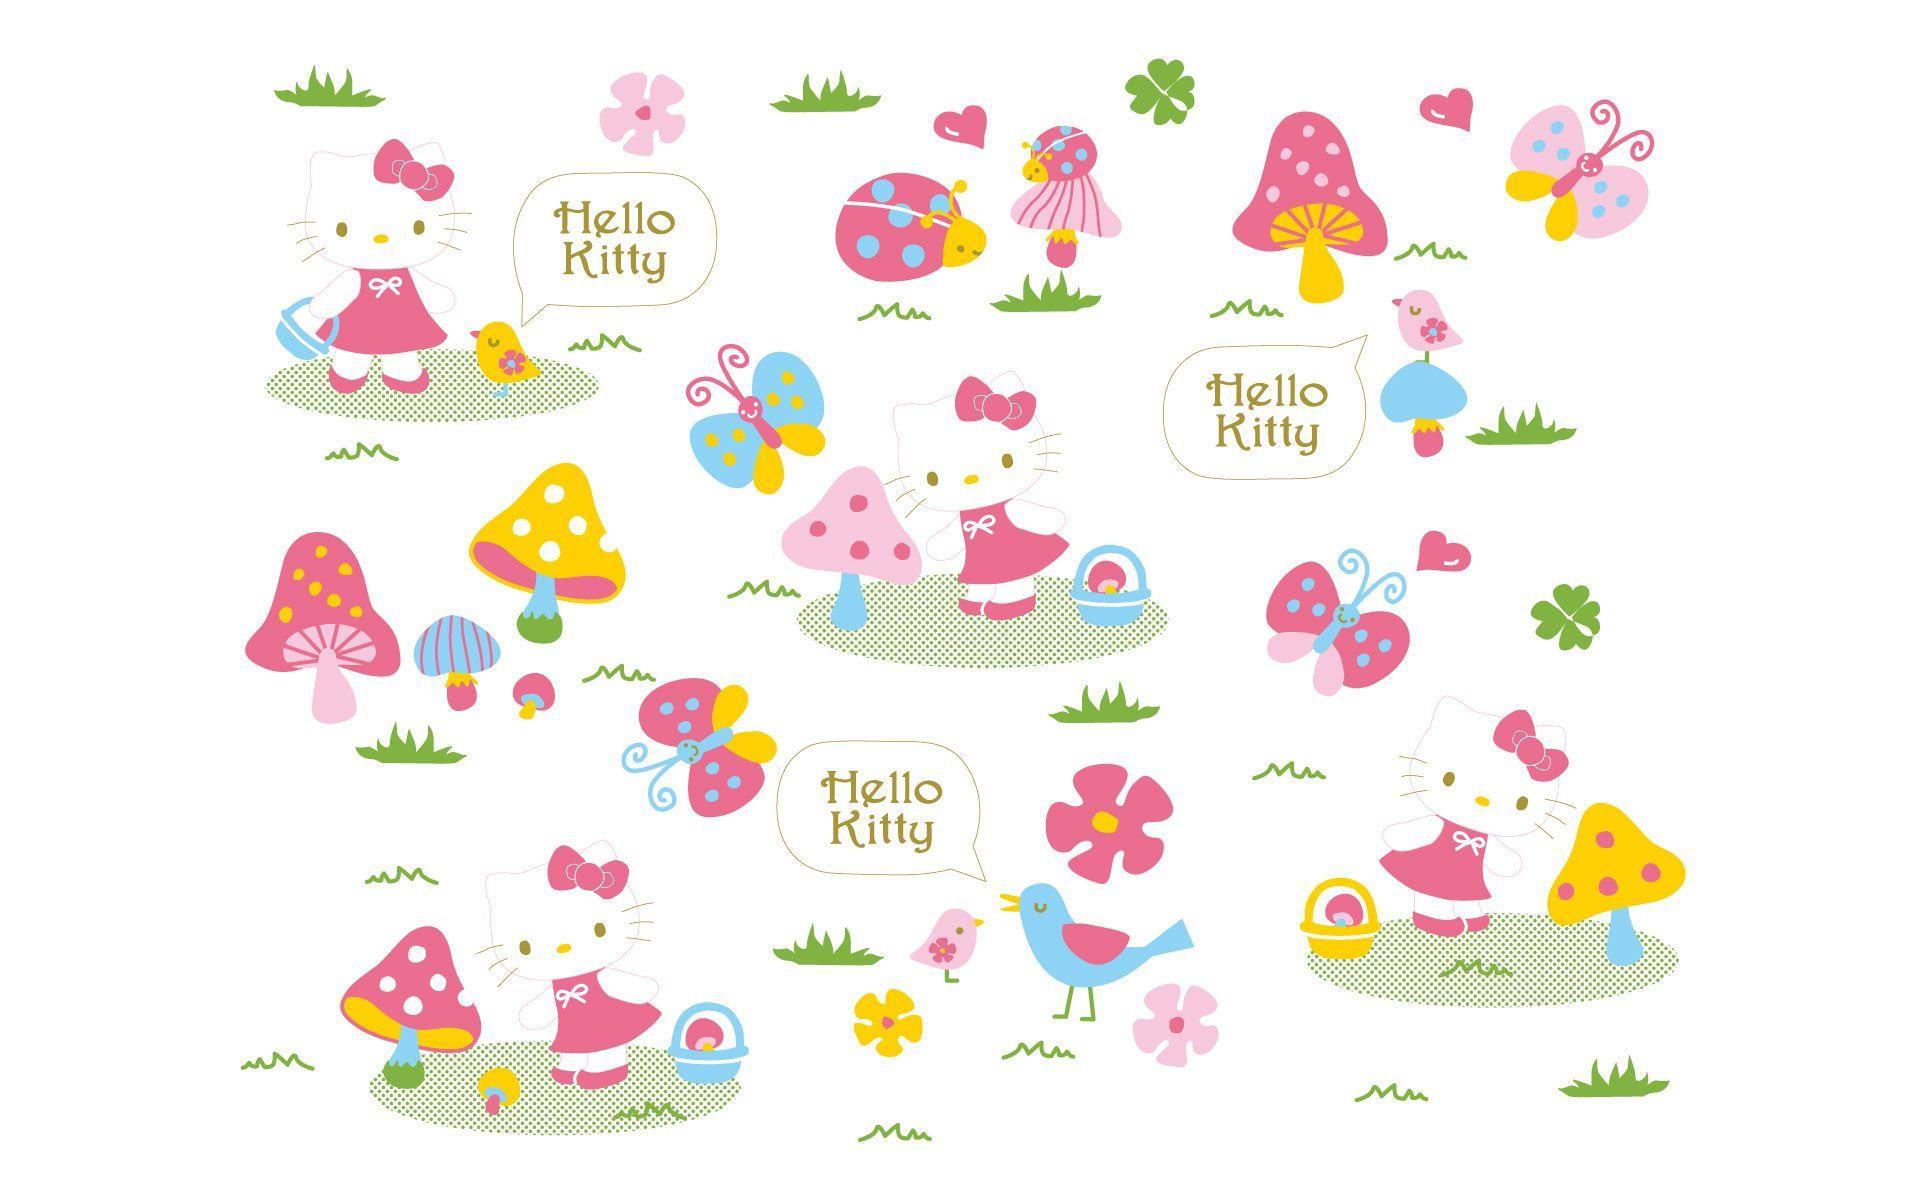 Download Hello Kitty Widescreen Picture Wallpaper 1920x1200. HD